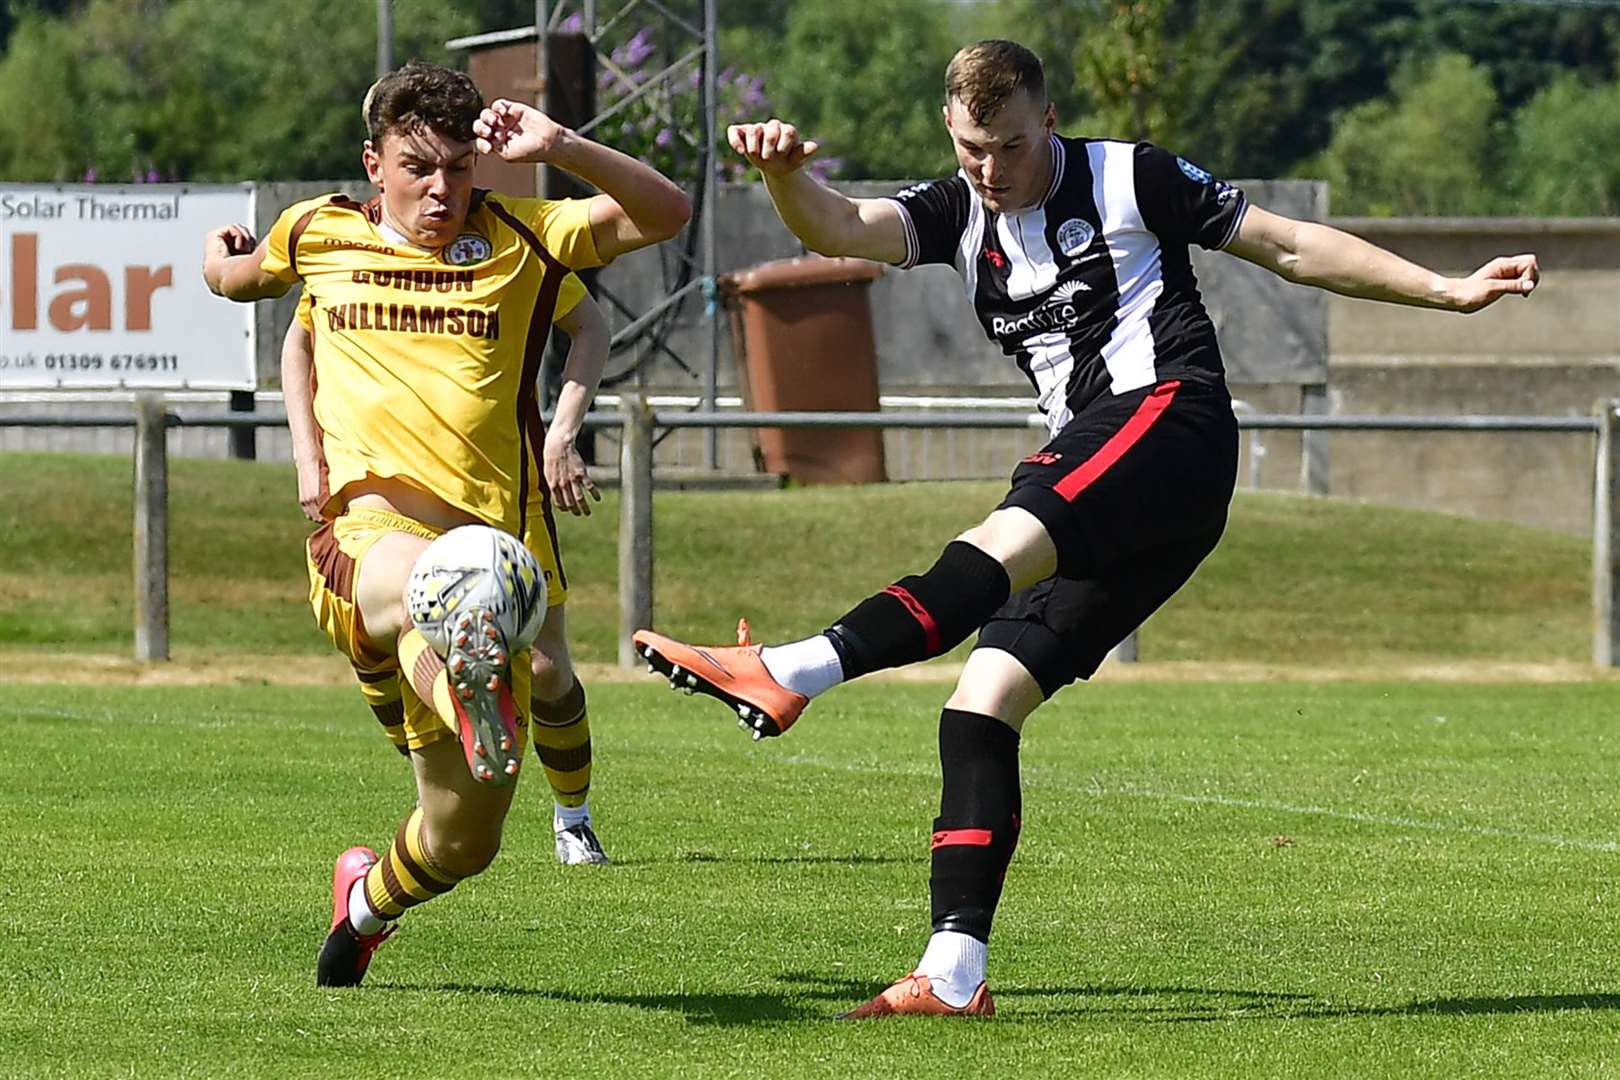 Forres Mechanics' Ruari Fraser attempts to block a shot from Wick Academy's Steven Anderson during the 1-1 draw at Mosset Park on the opening day of the 2021/22 Highland League season. Picture: Mel Roger